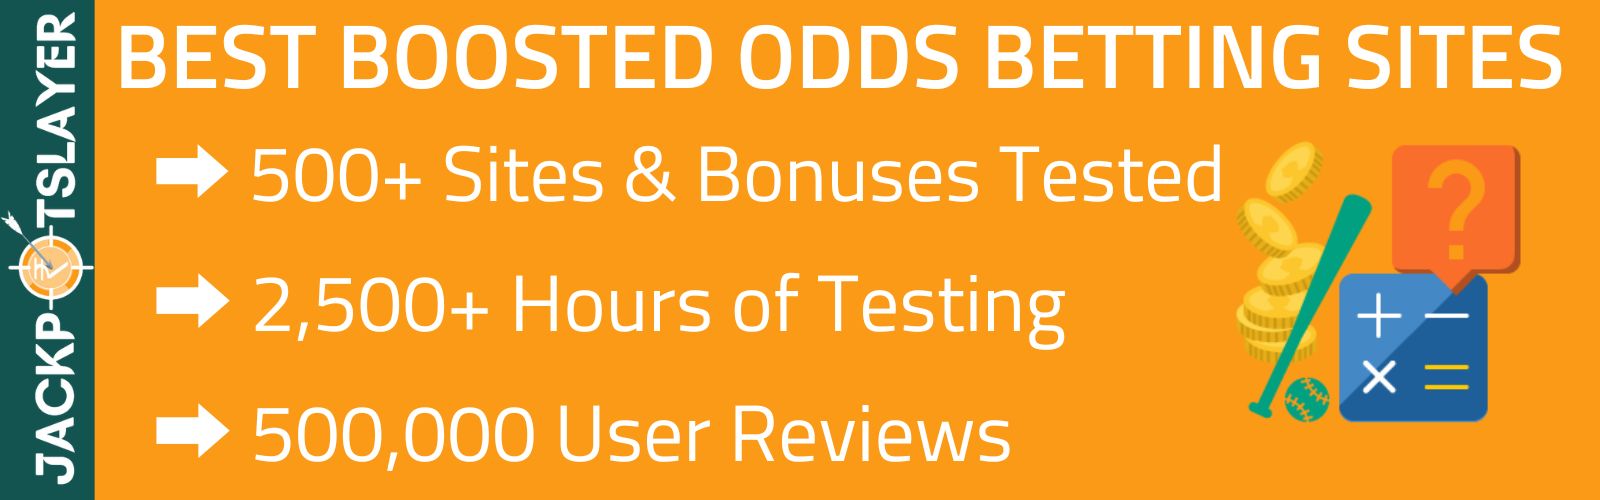 Best Boosted Odds Betting Sites